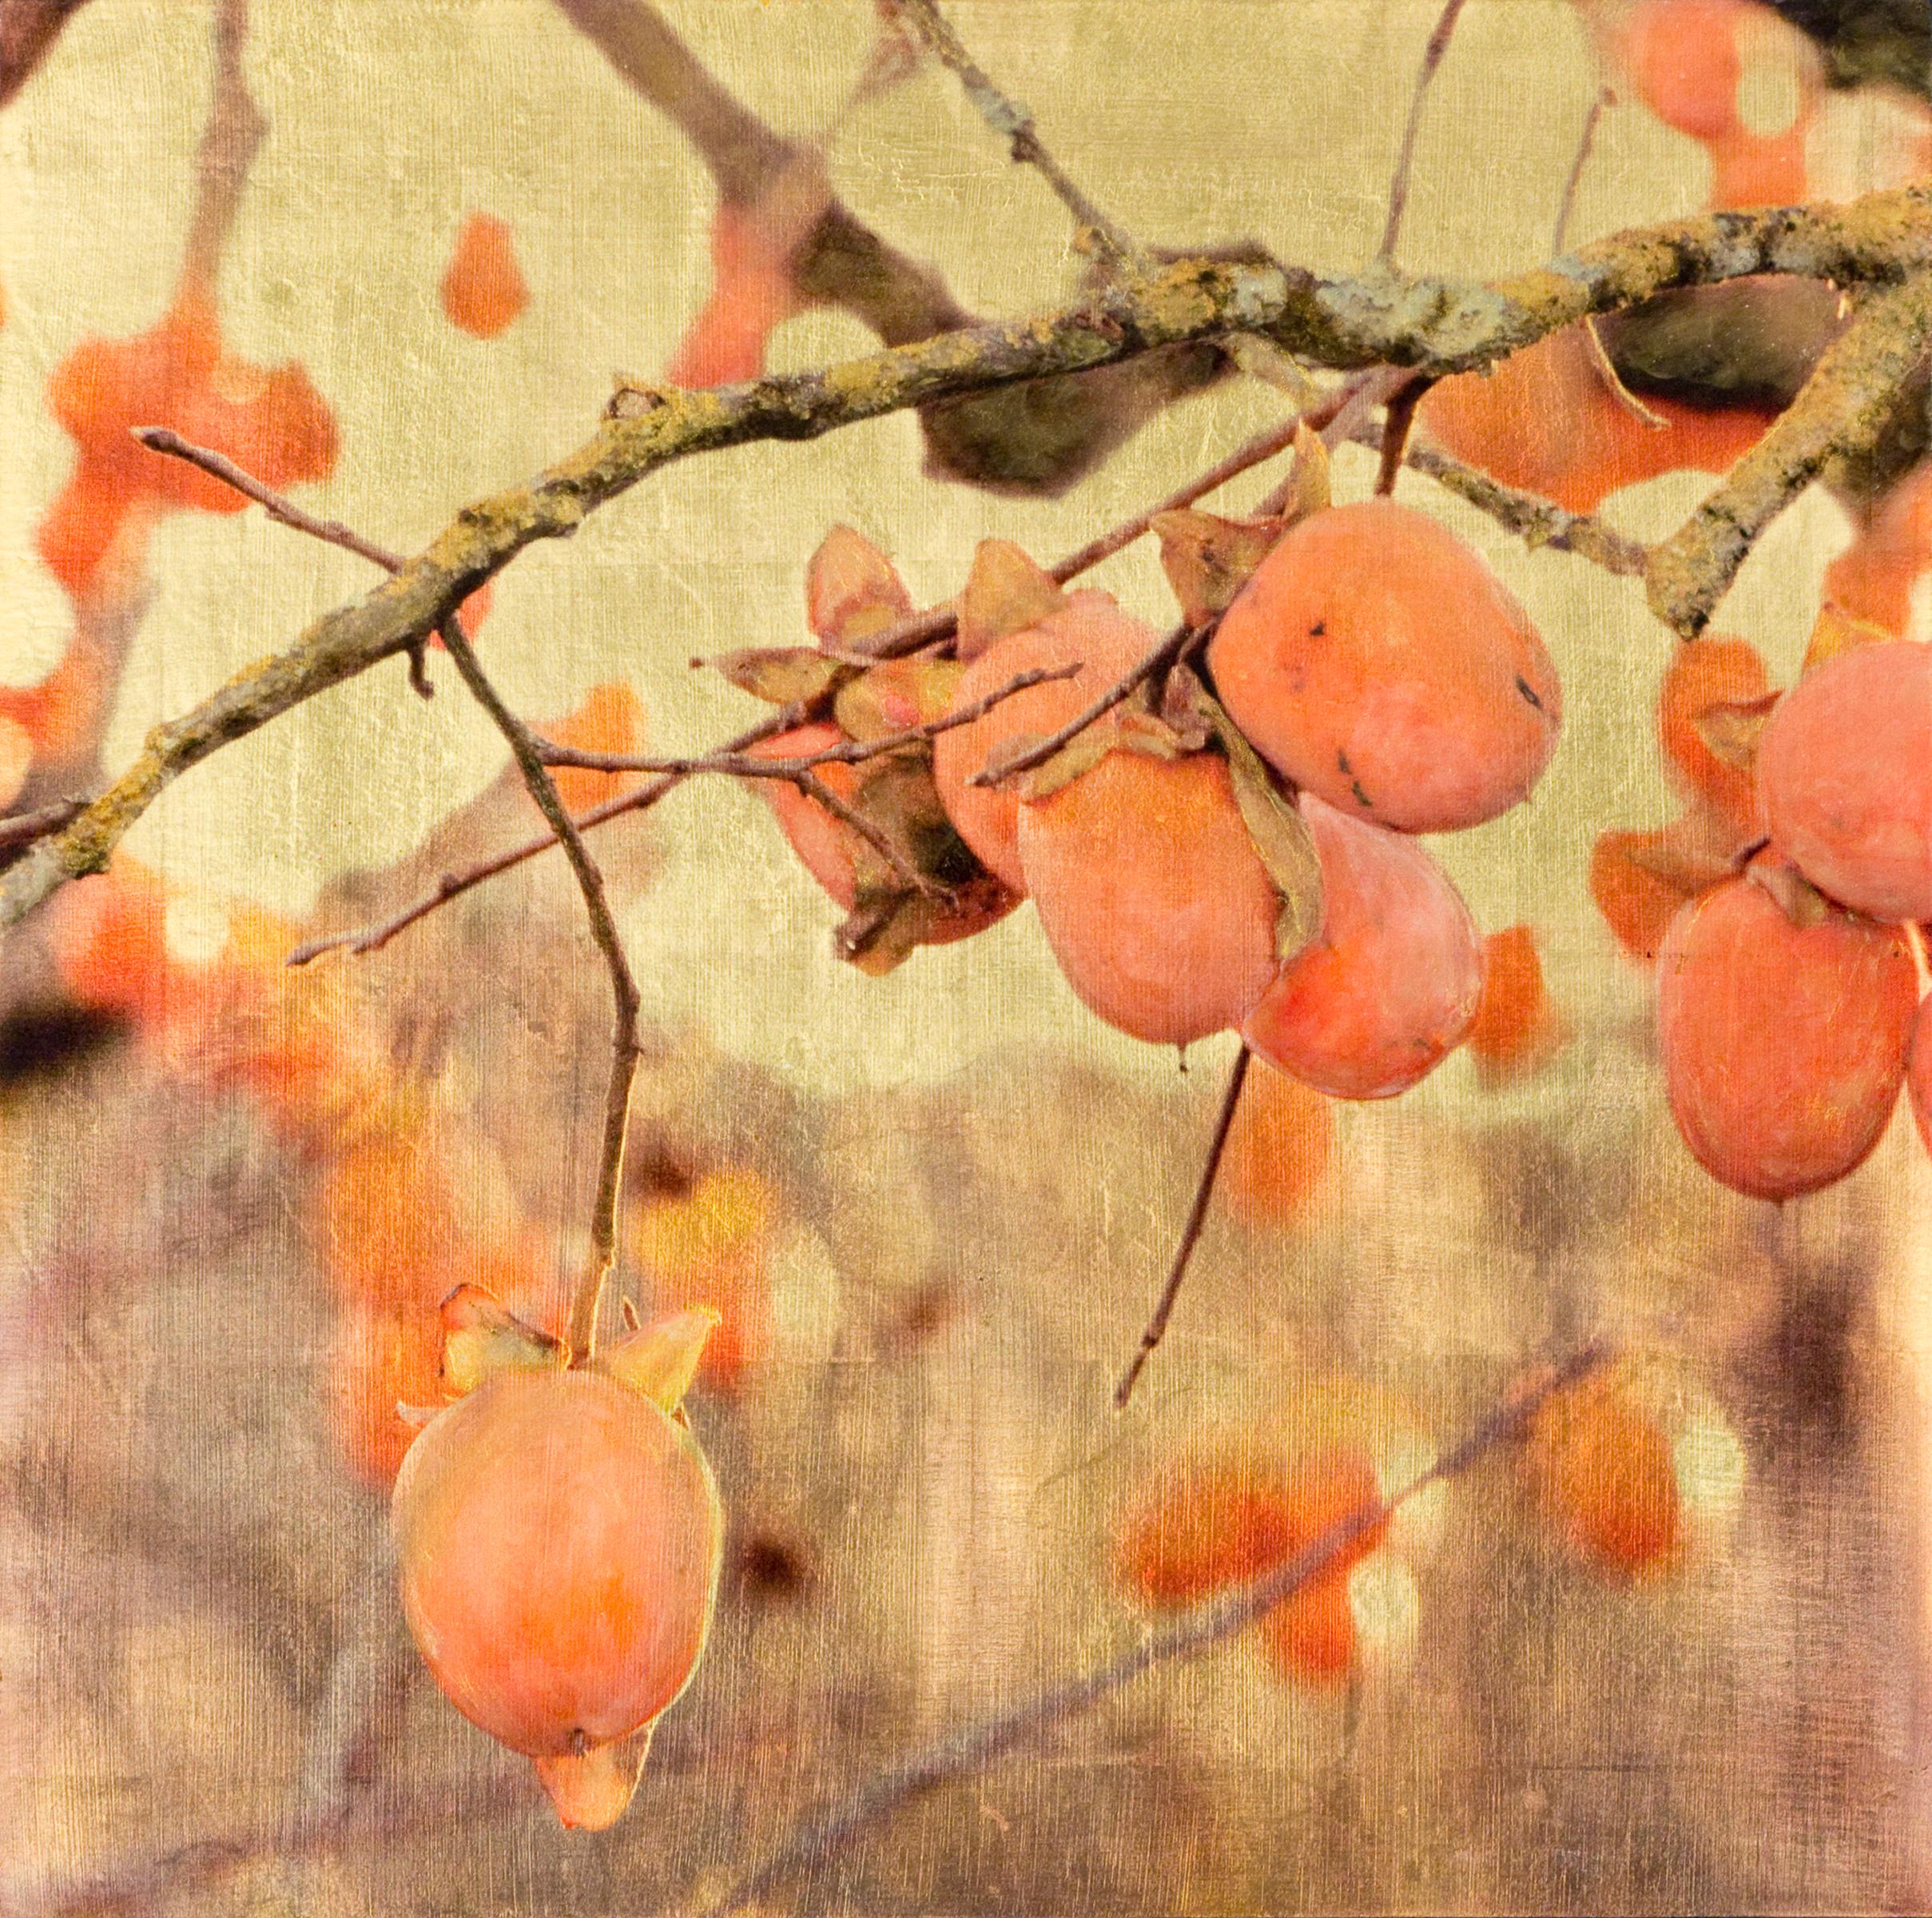 Jove's Fire, Persimmon Tree, Orange, Gold Leaf, Resin - Mixed Media Art by Susan Goldsmith